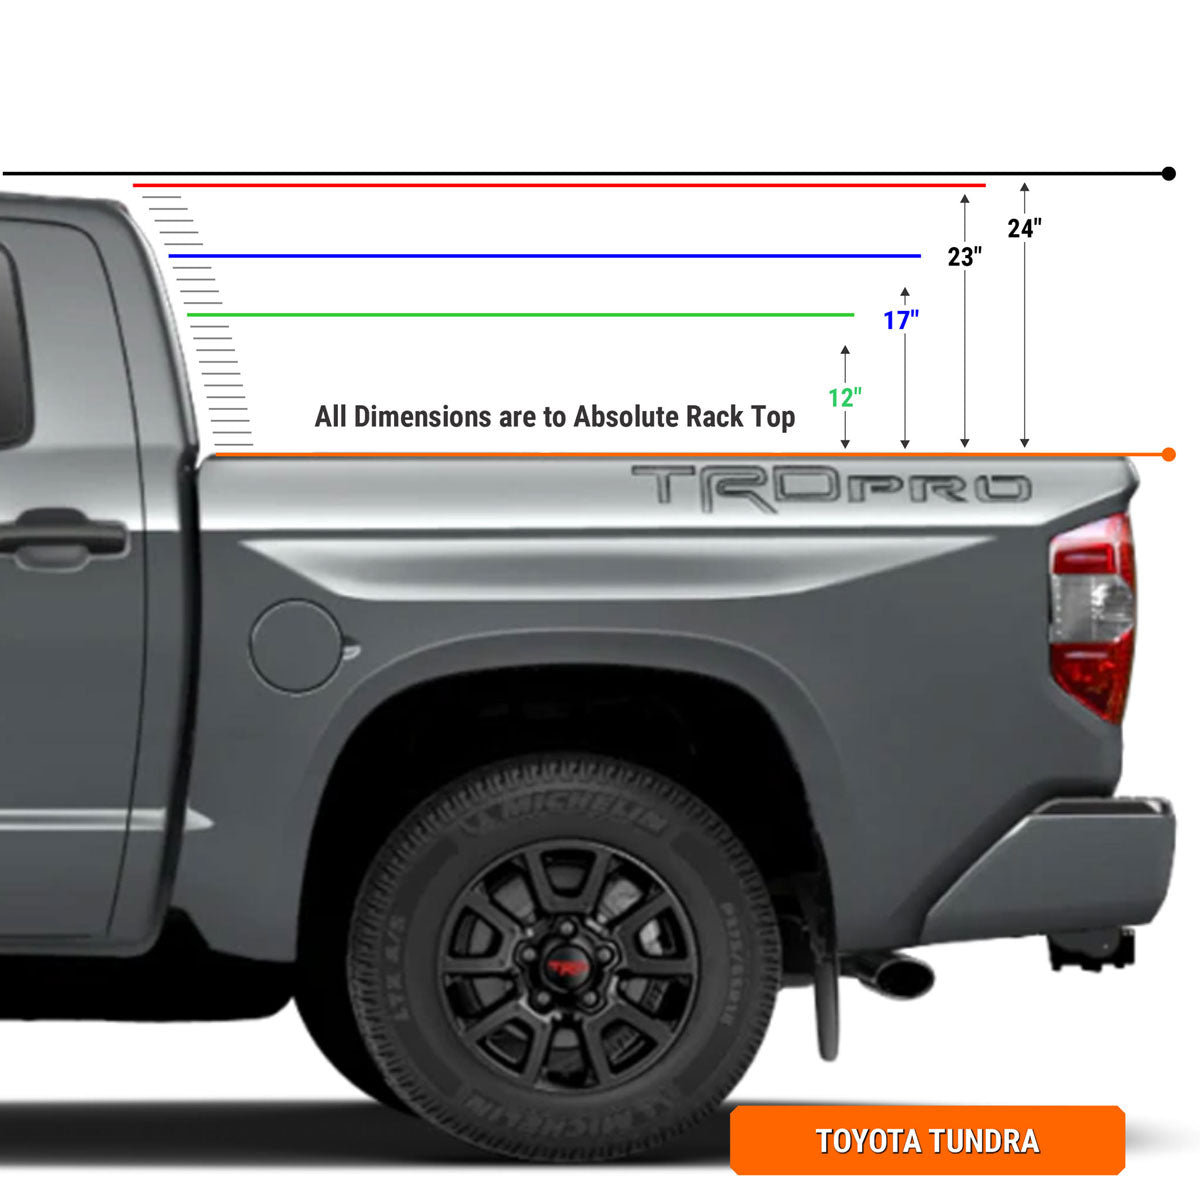 Toyota Tundra Xtrusion Bed Rack height chart.